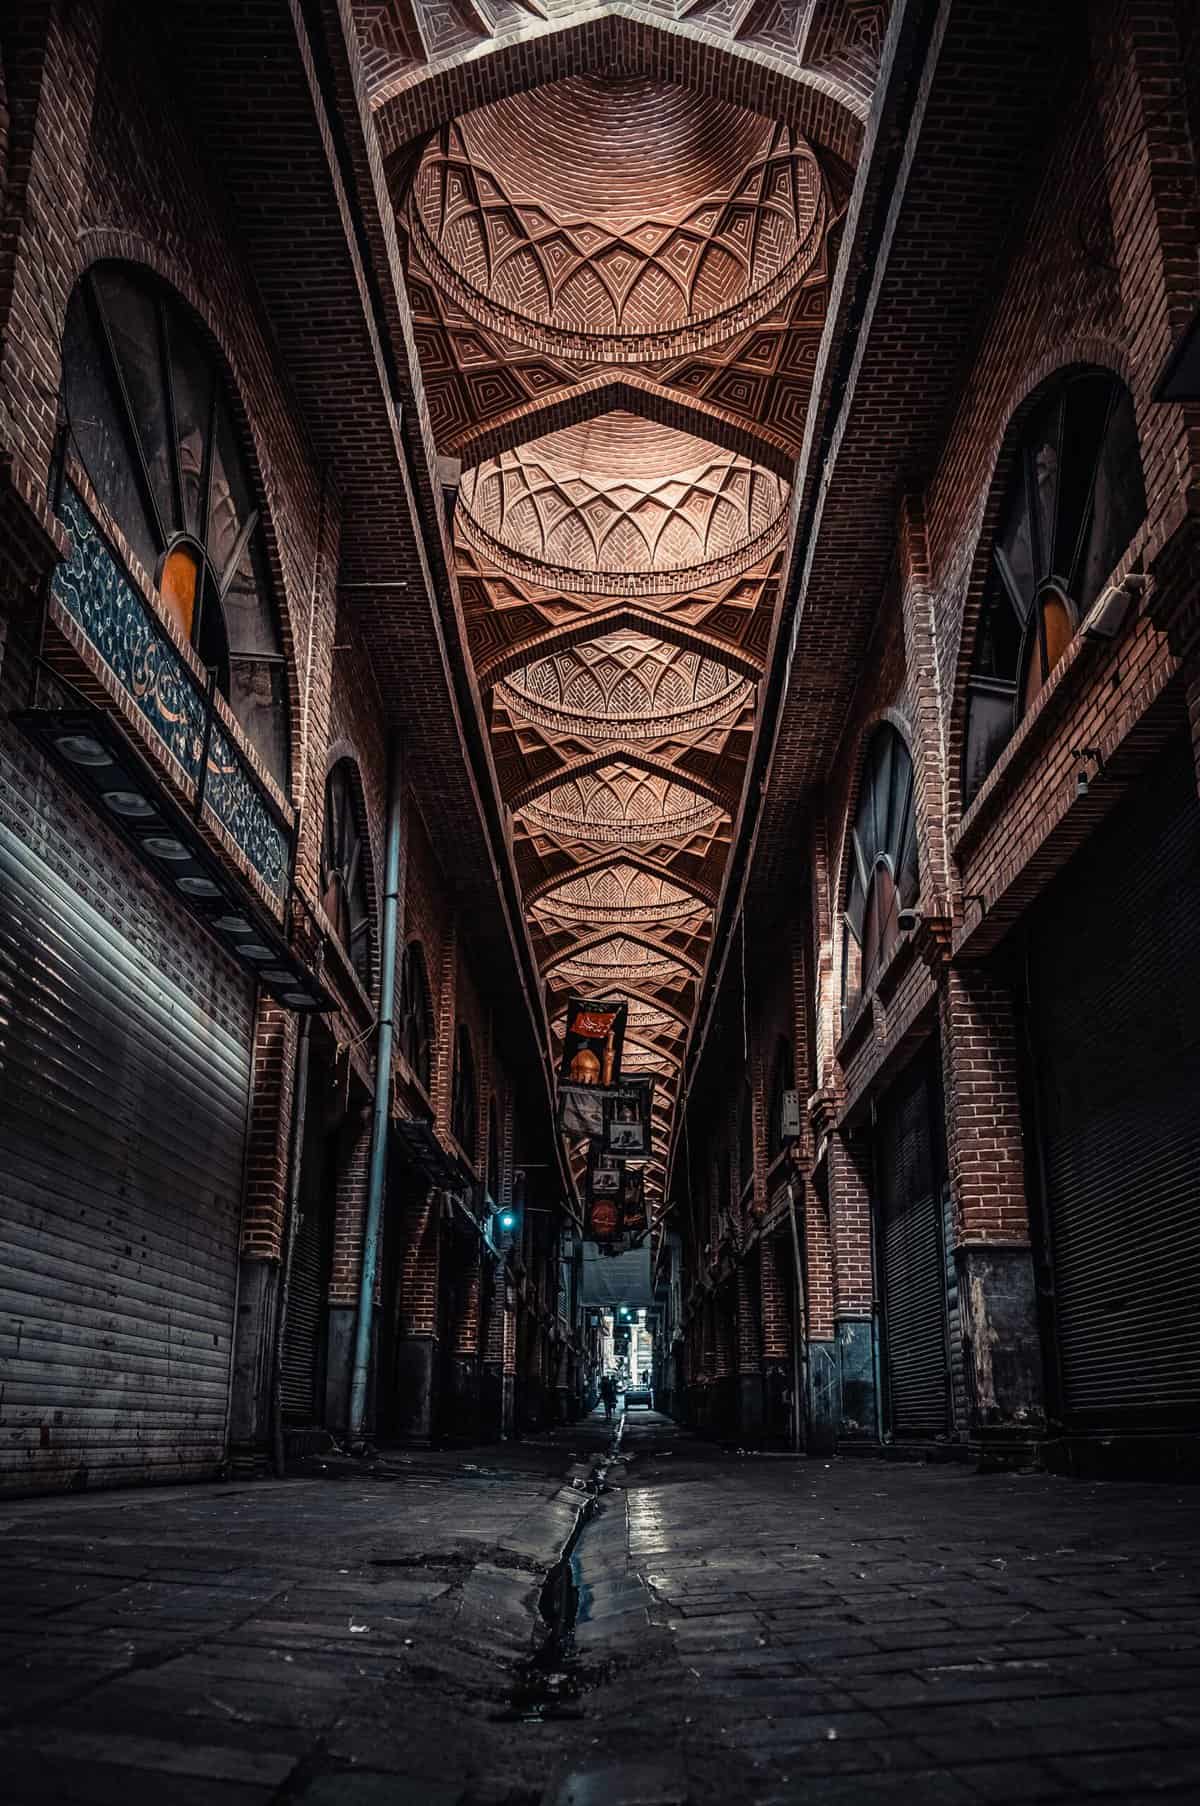 Dark alley with closed garage doors and banners hanging